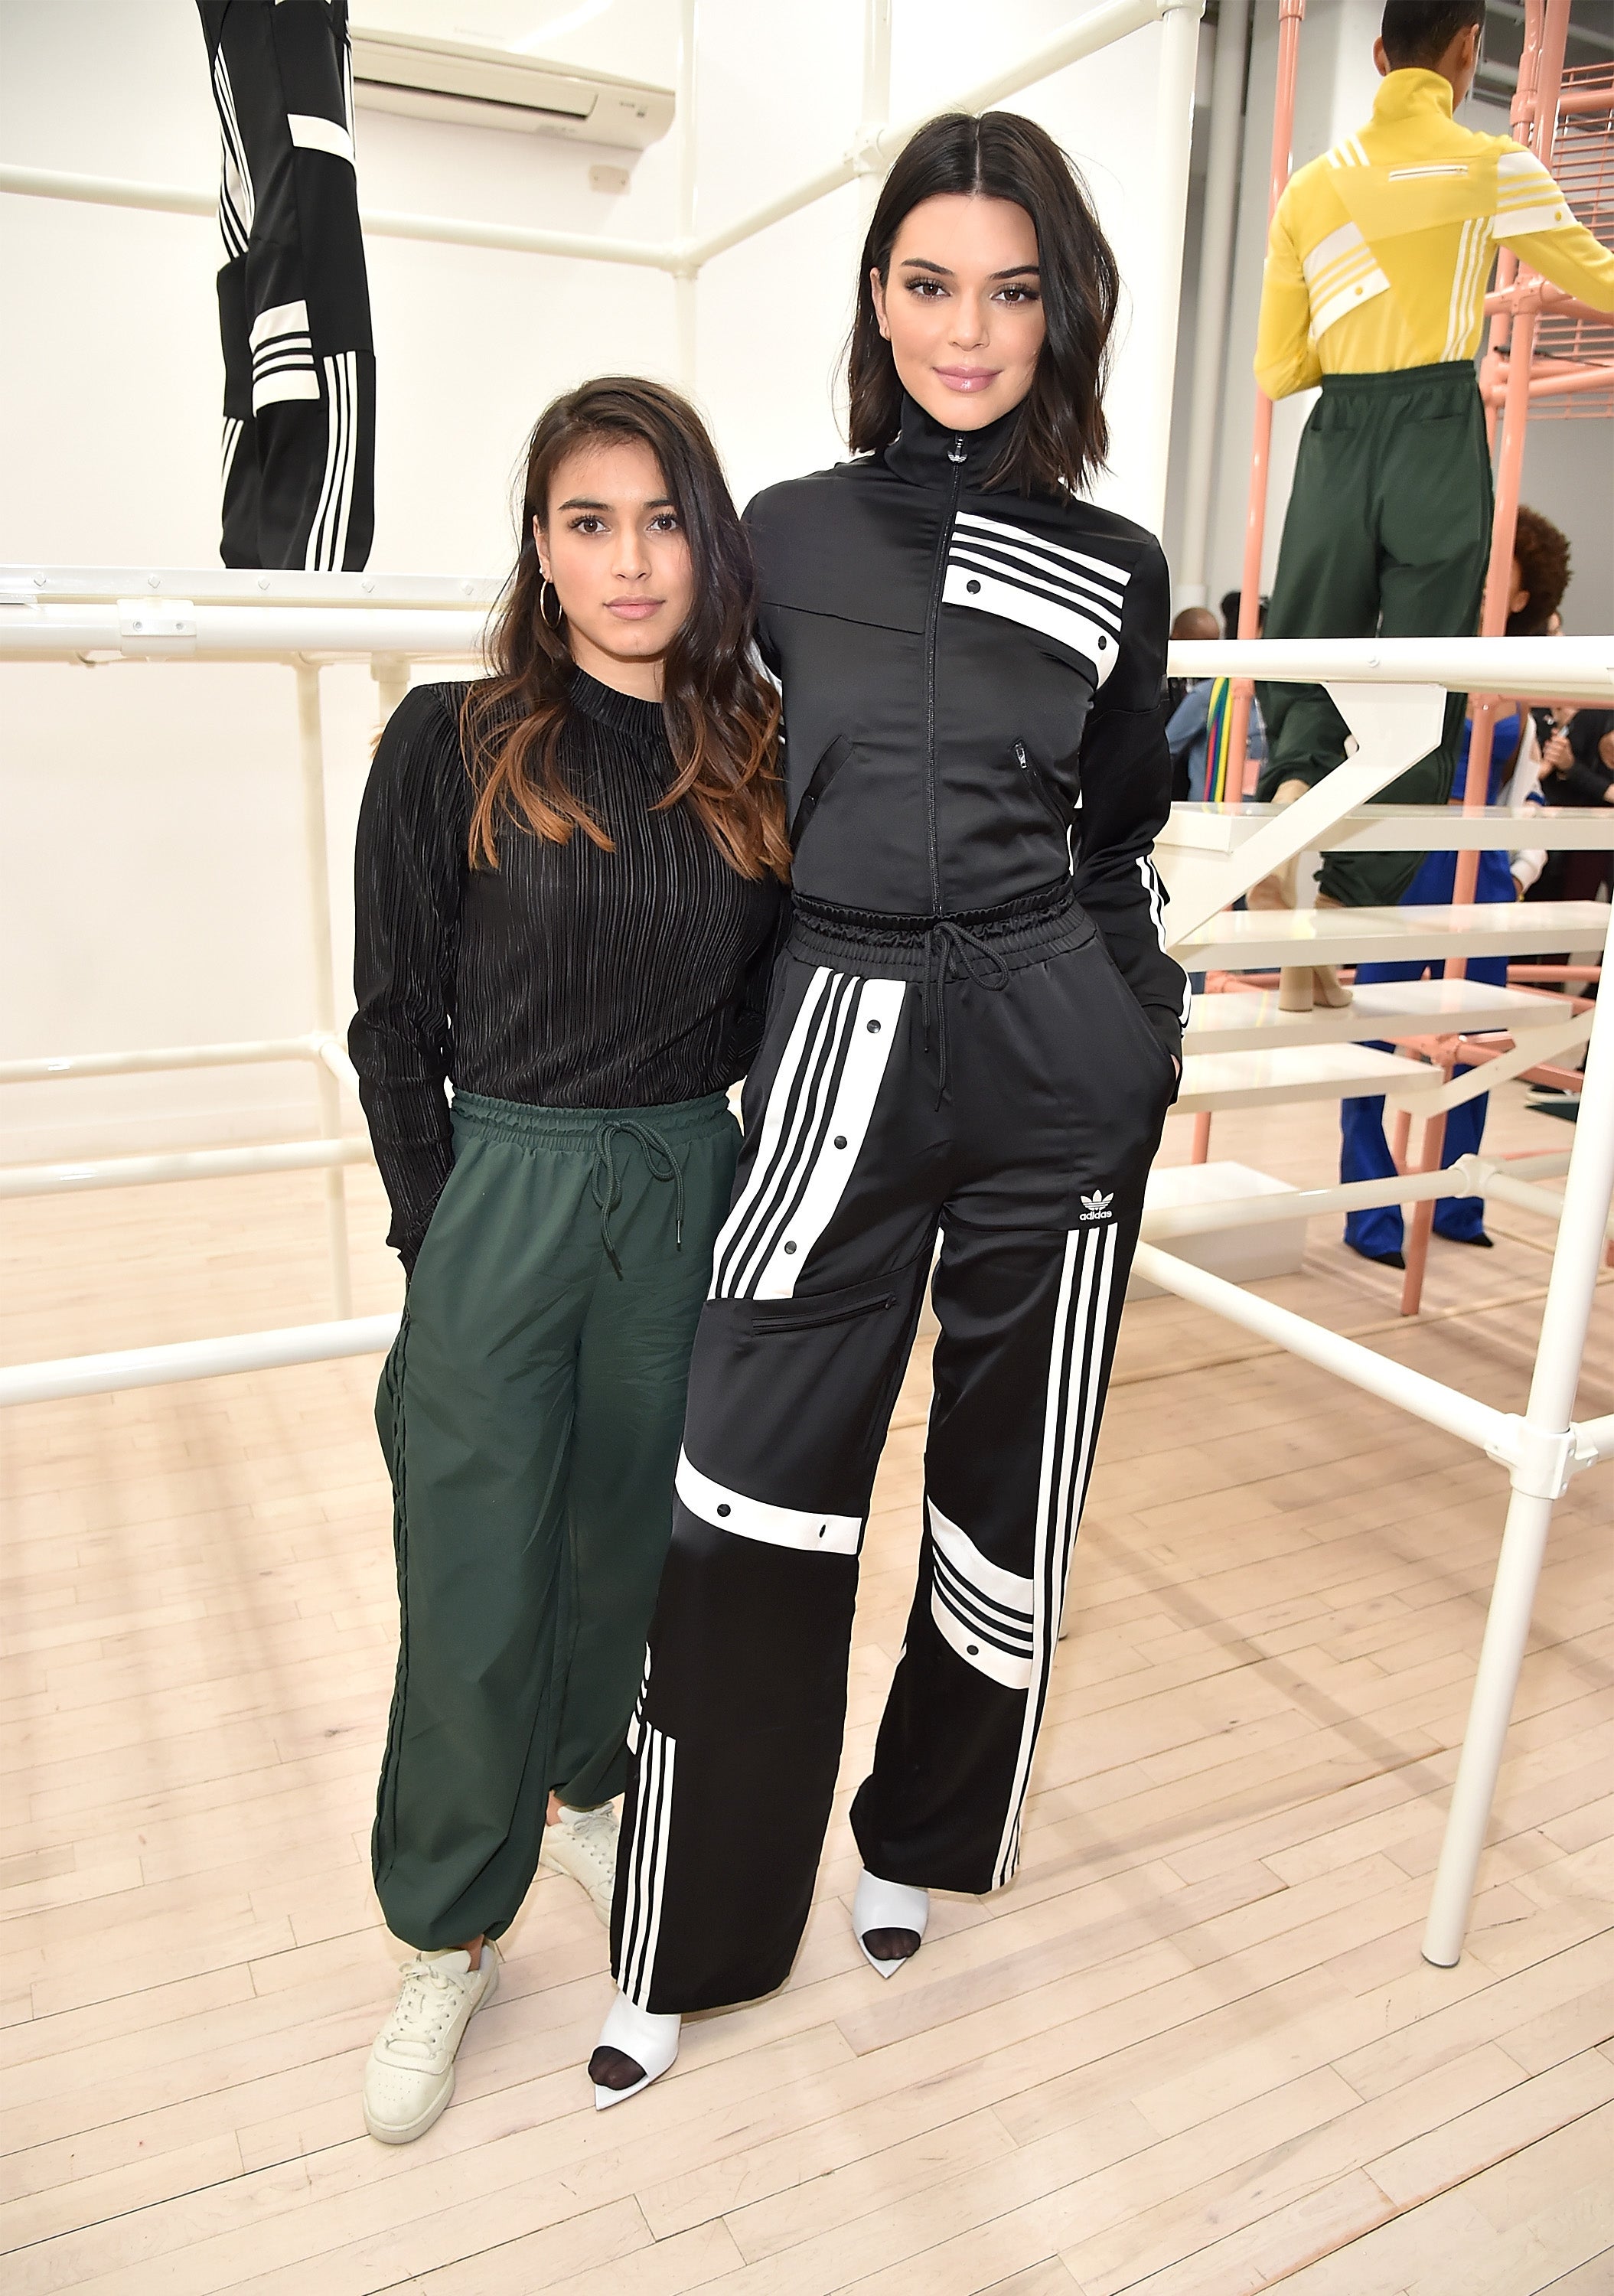 Doe een poging laten we het doen samen Adidas Kicks Off New York Fashion Week With Kendall Jenner and a Diverse  Group of Models | Entertainment Tonight